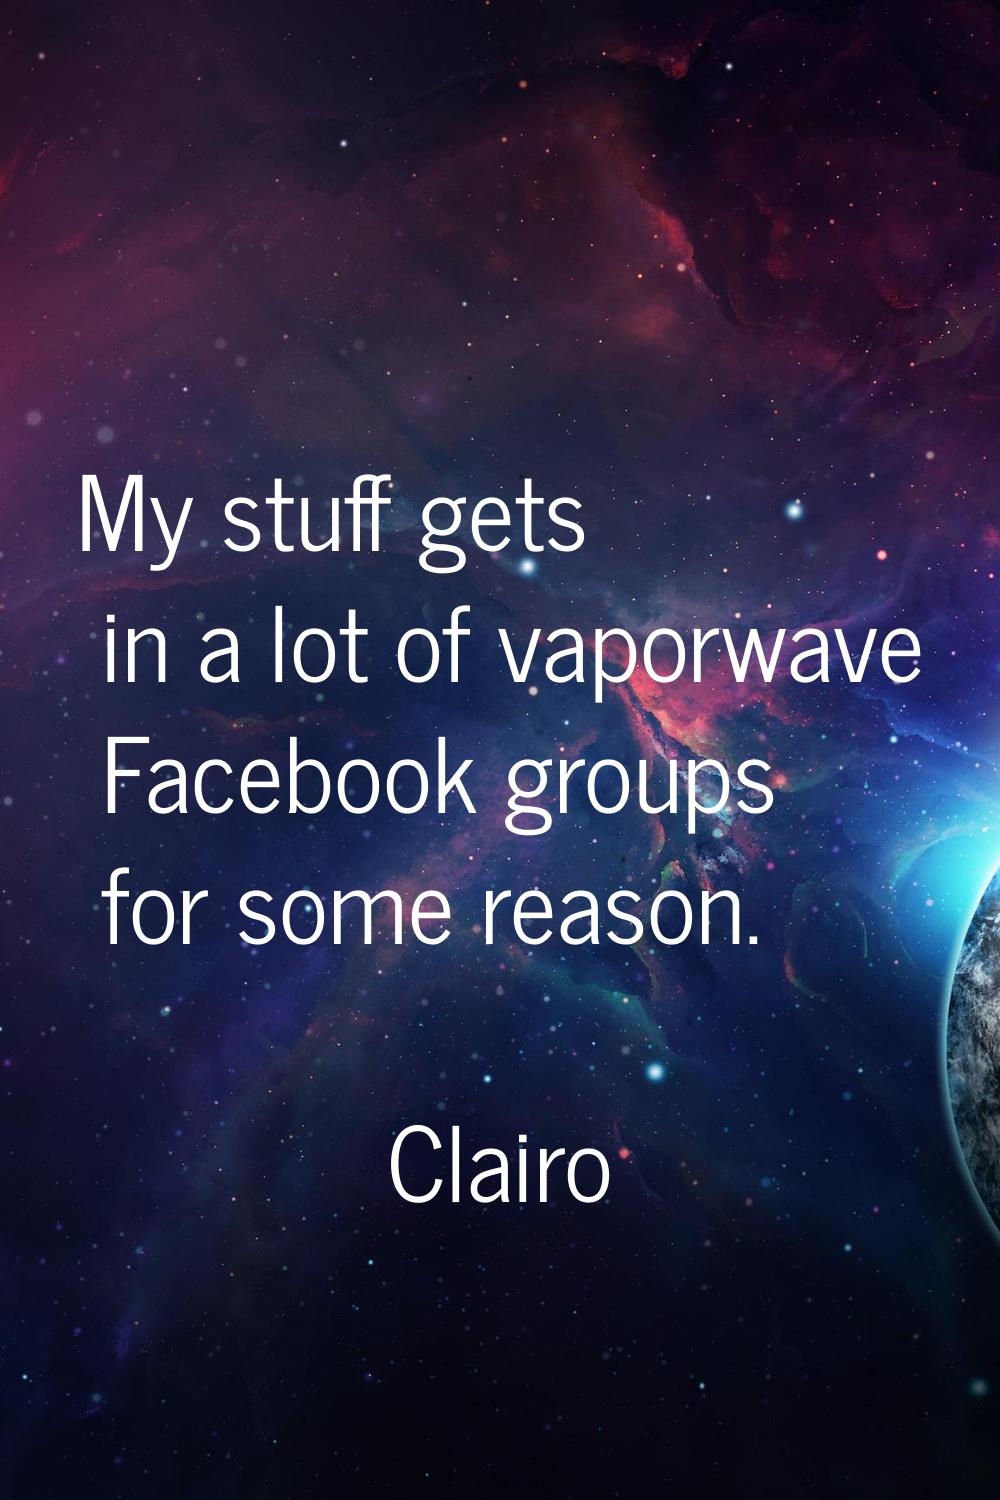 My stuff gets in a lot of vaporwave Facebook groups for some reason.